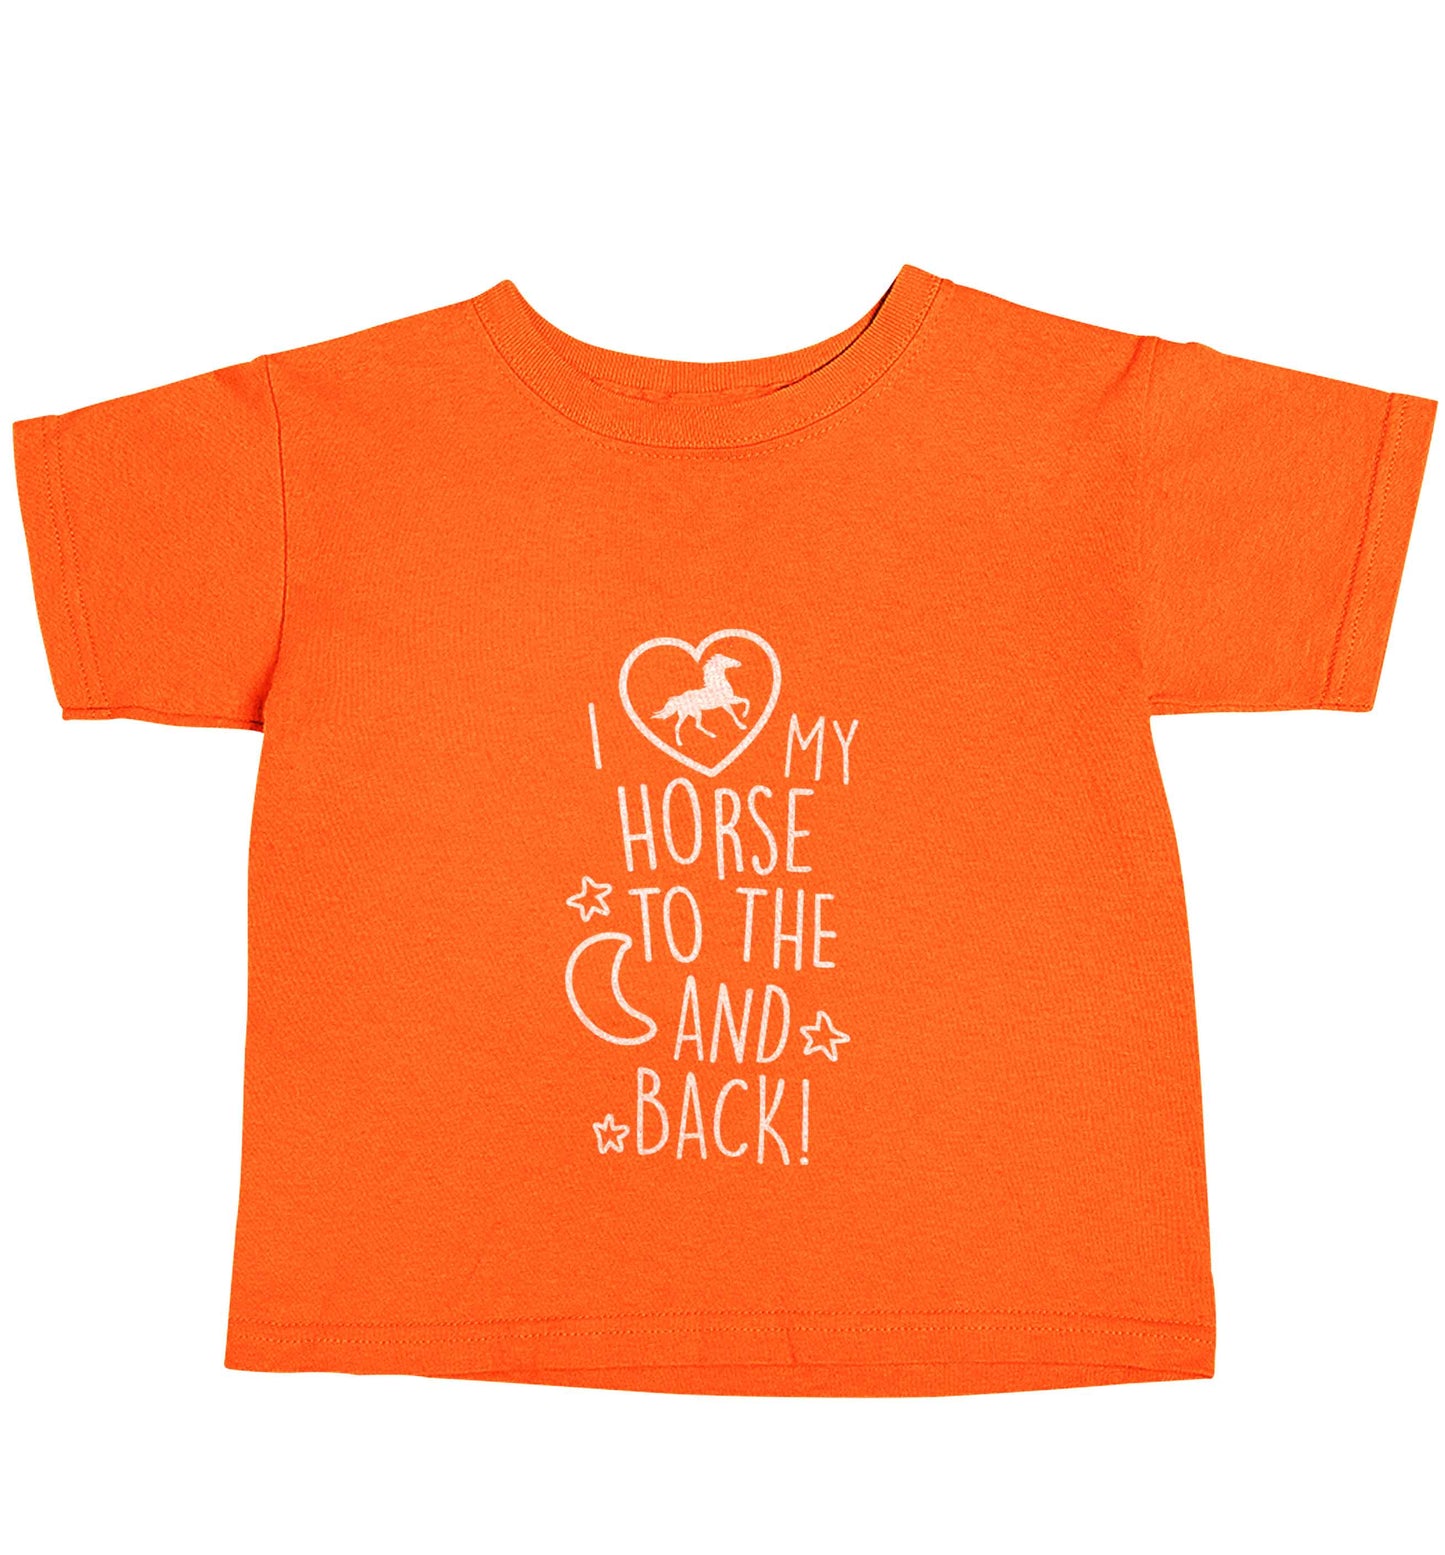 I love my horse to the moon and back orange baby toddler Tshirt 2 Years